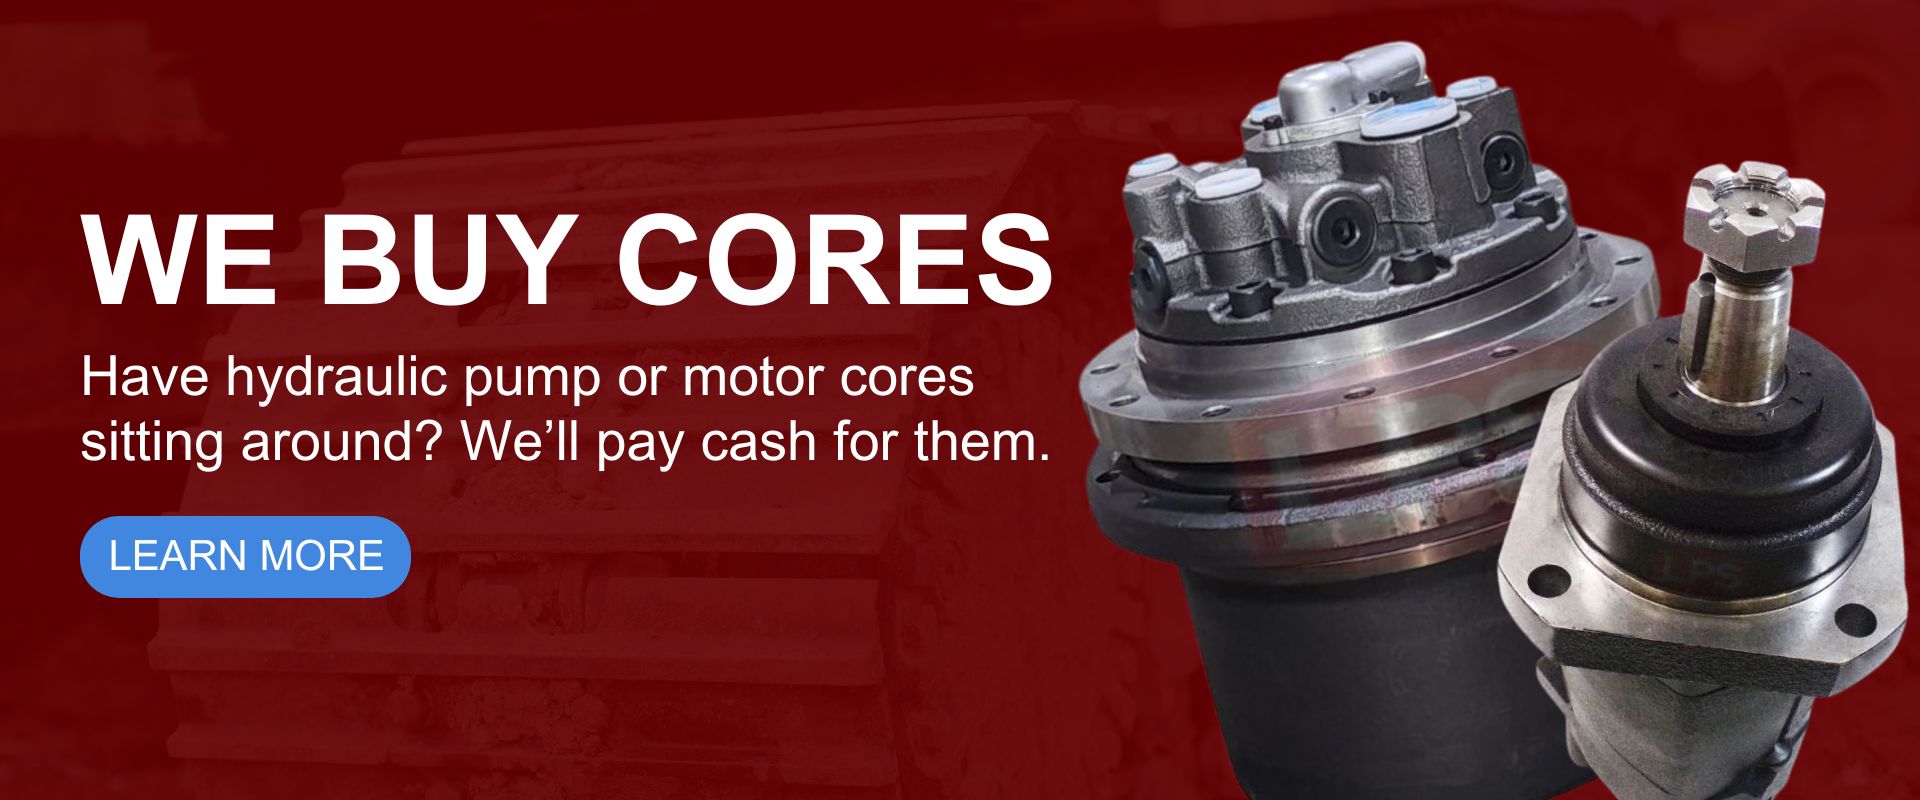 We Buy Cores. Learn more!